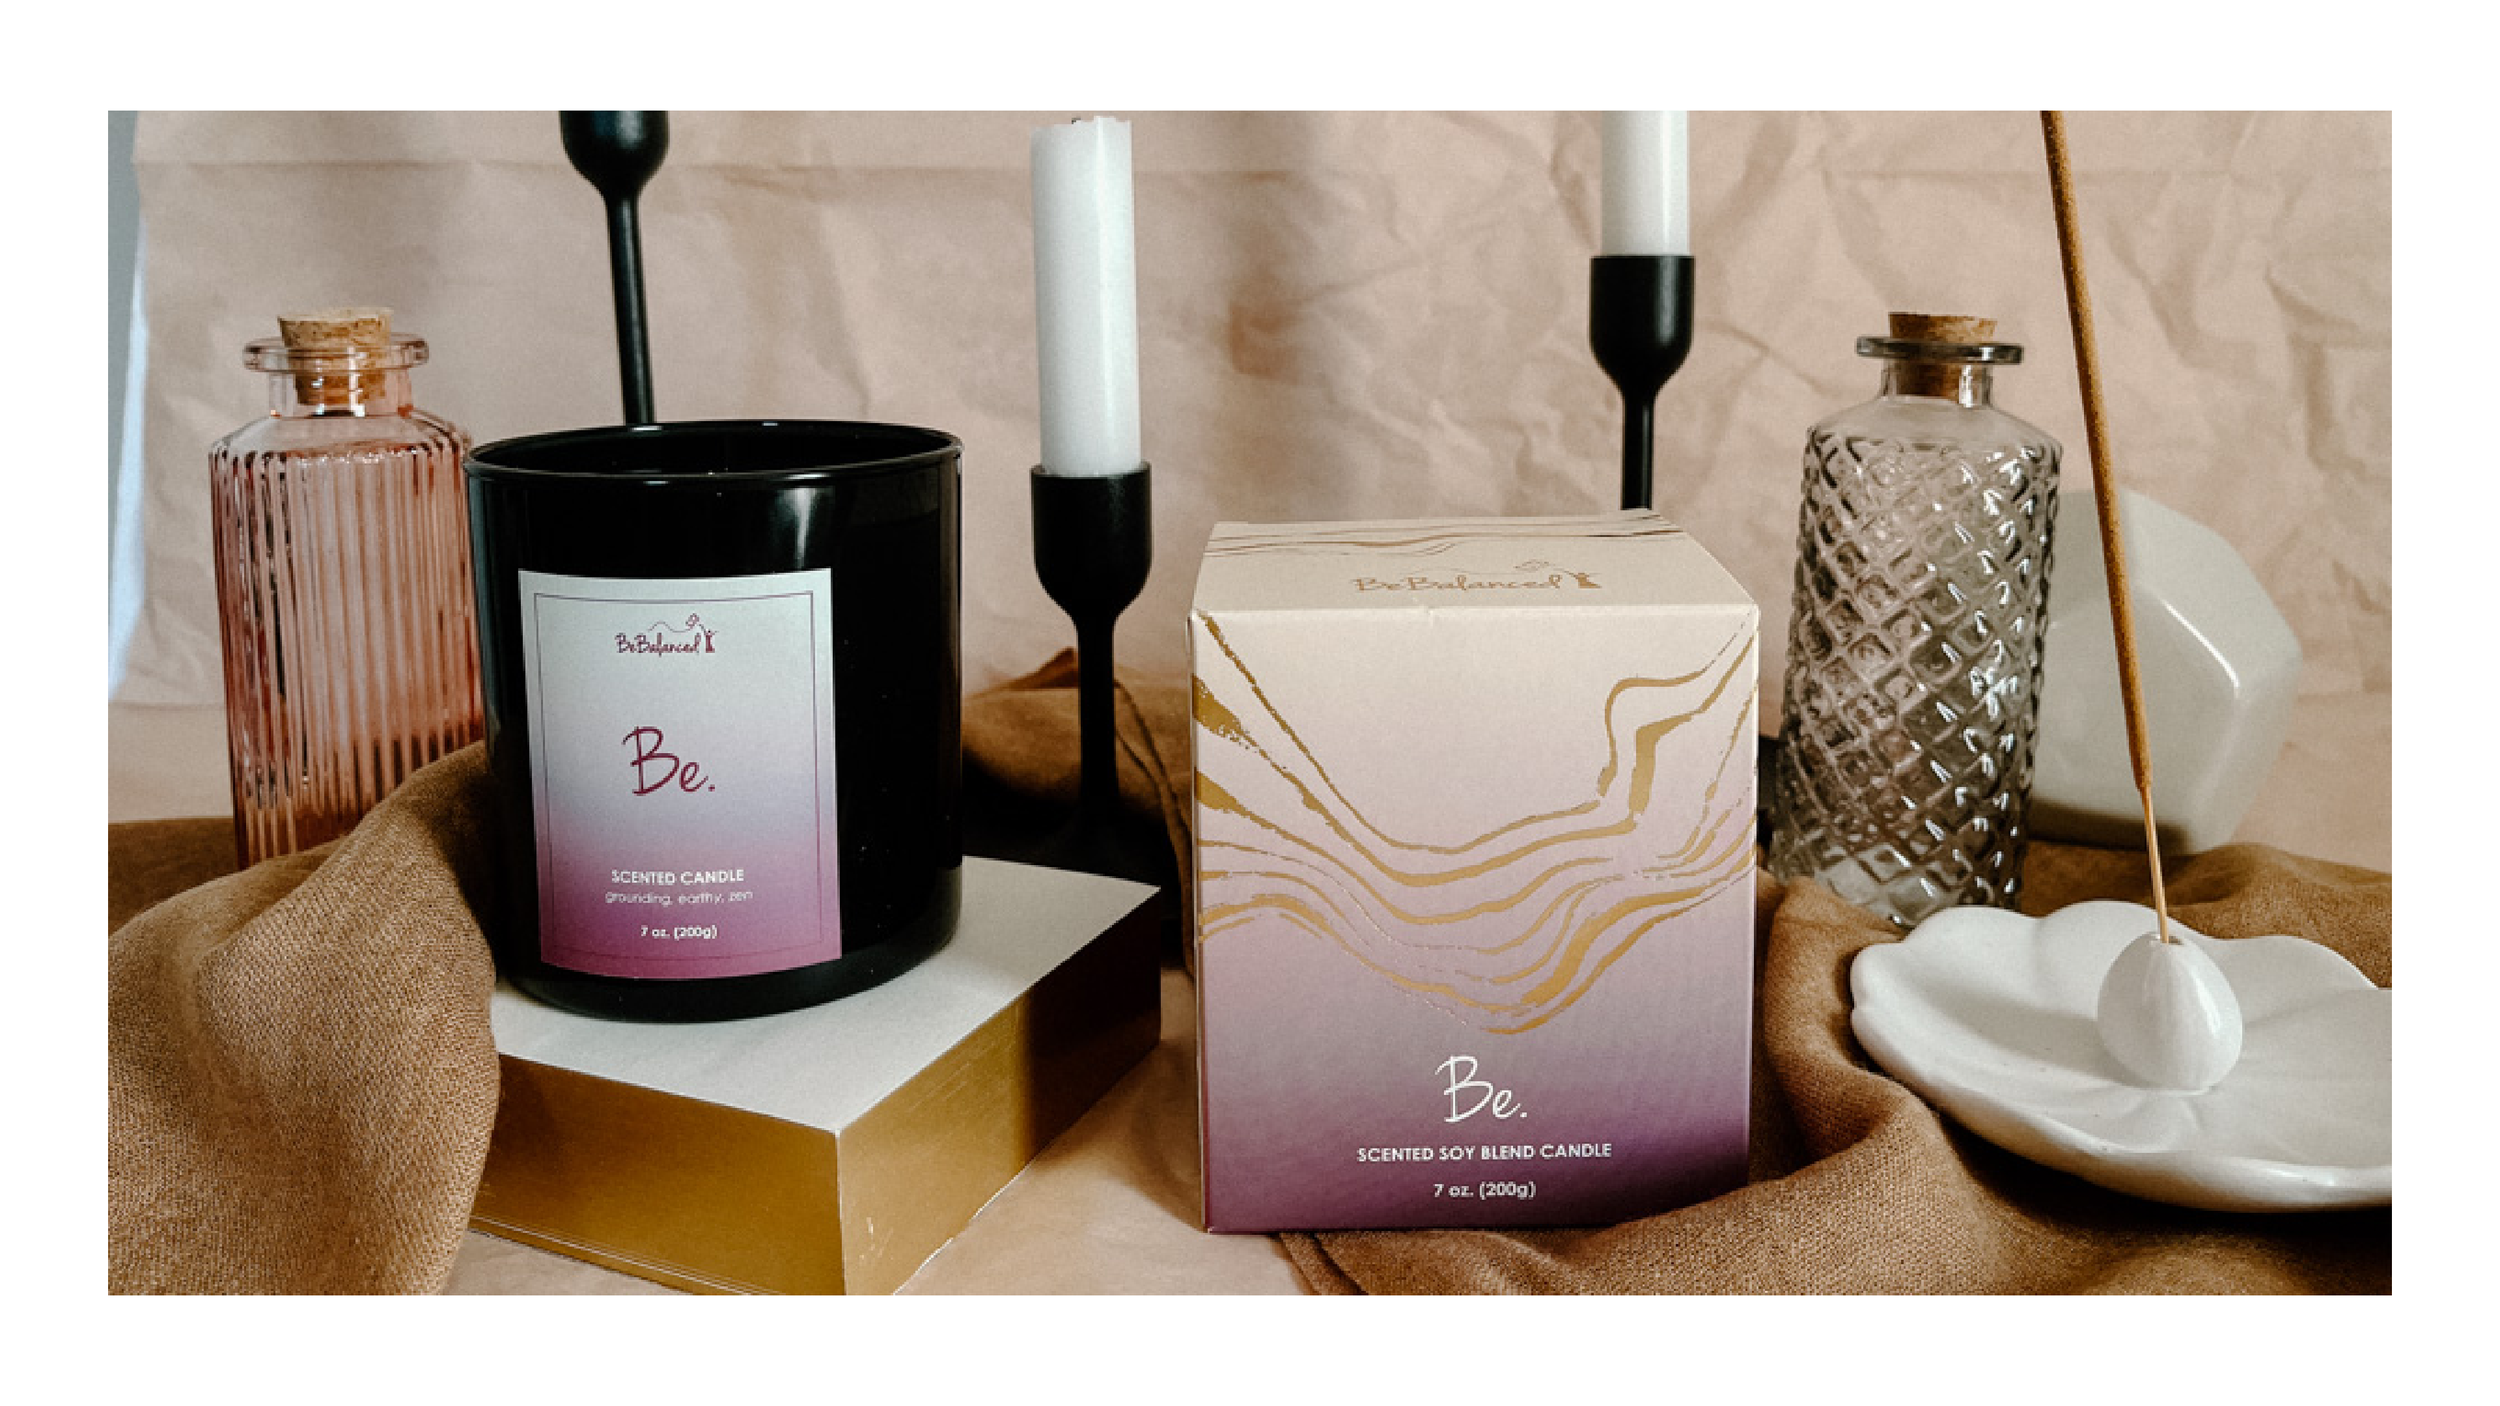 WildHive_BeBalanced-candle-andskincare-packaging_8.png